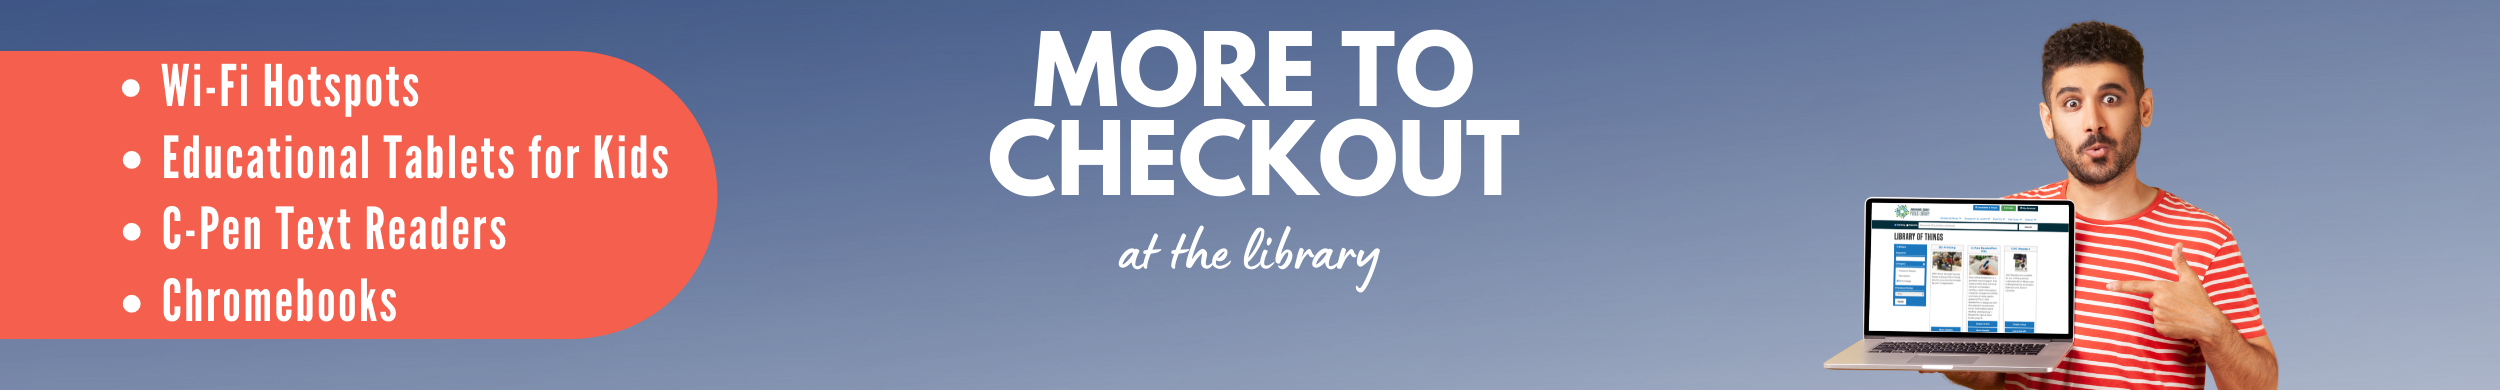 More to Checkout at the Library. Wi-Fi Hotspots. Educational Tablets for Kids. C-Pen Text Readers. Chromebooks.